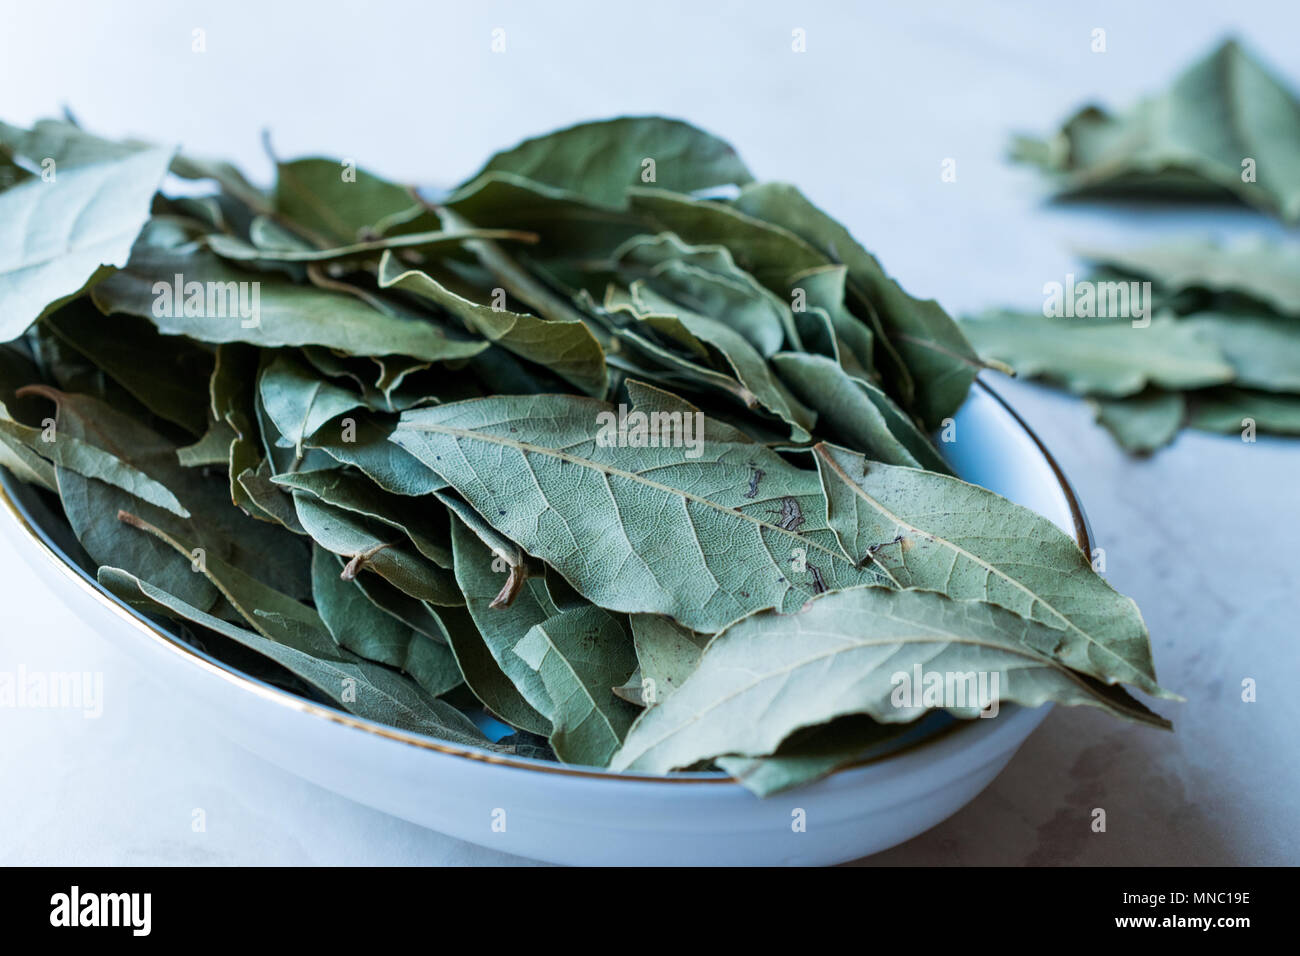 Daphne Leaves from Laurel Tree. Organic Product. Stock Photo